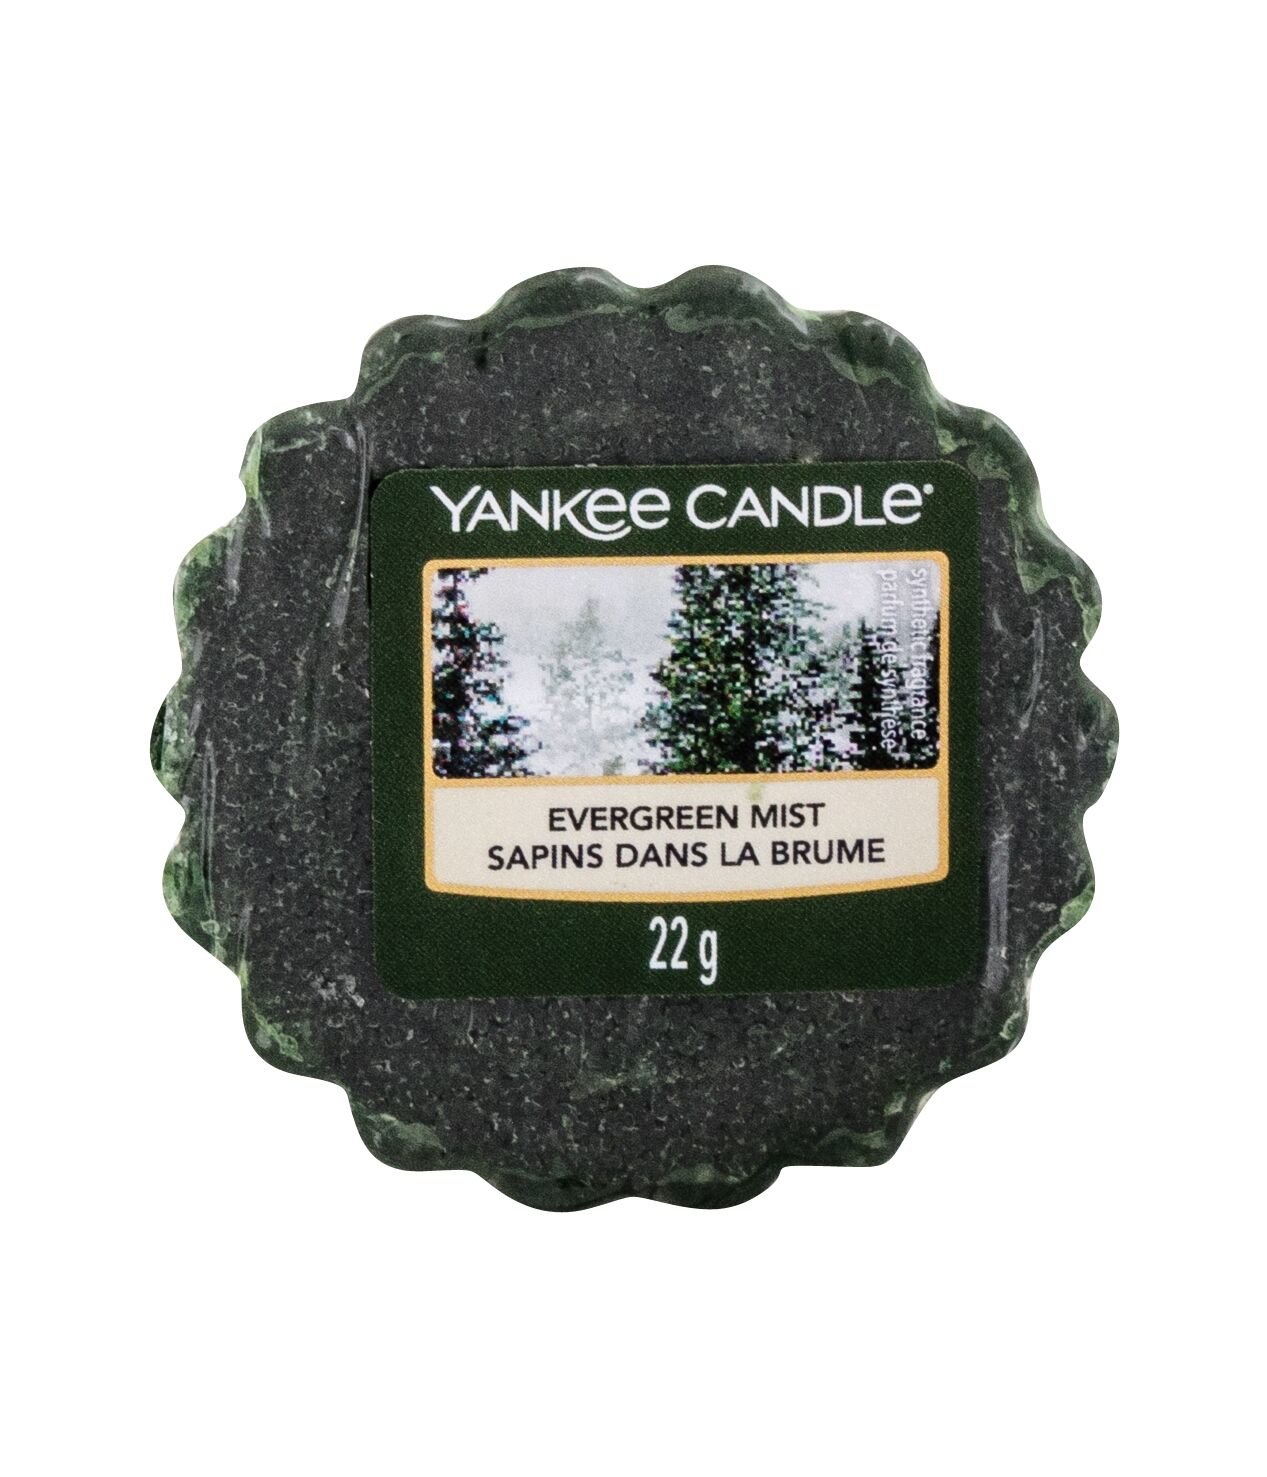 Yankee Candle Evergreen Mist 22g Kvepalai Unisex Scented Candle